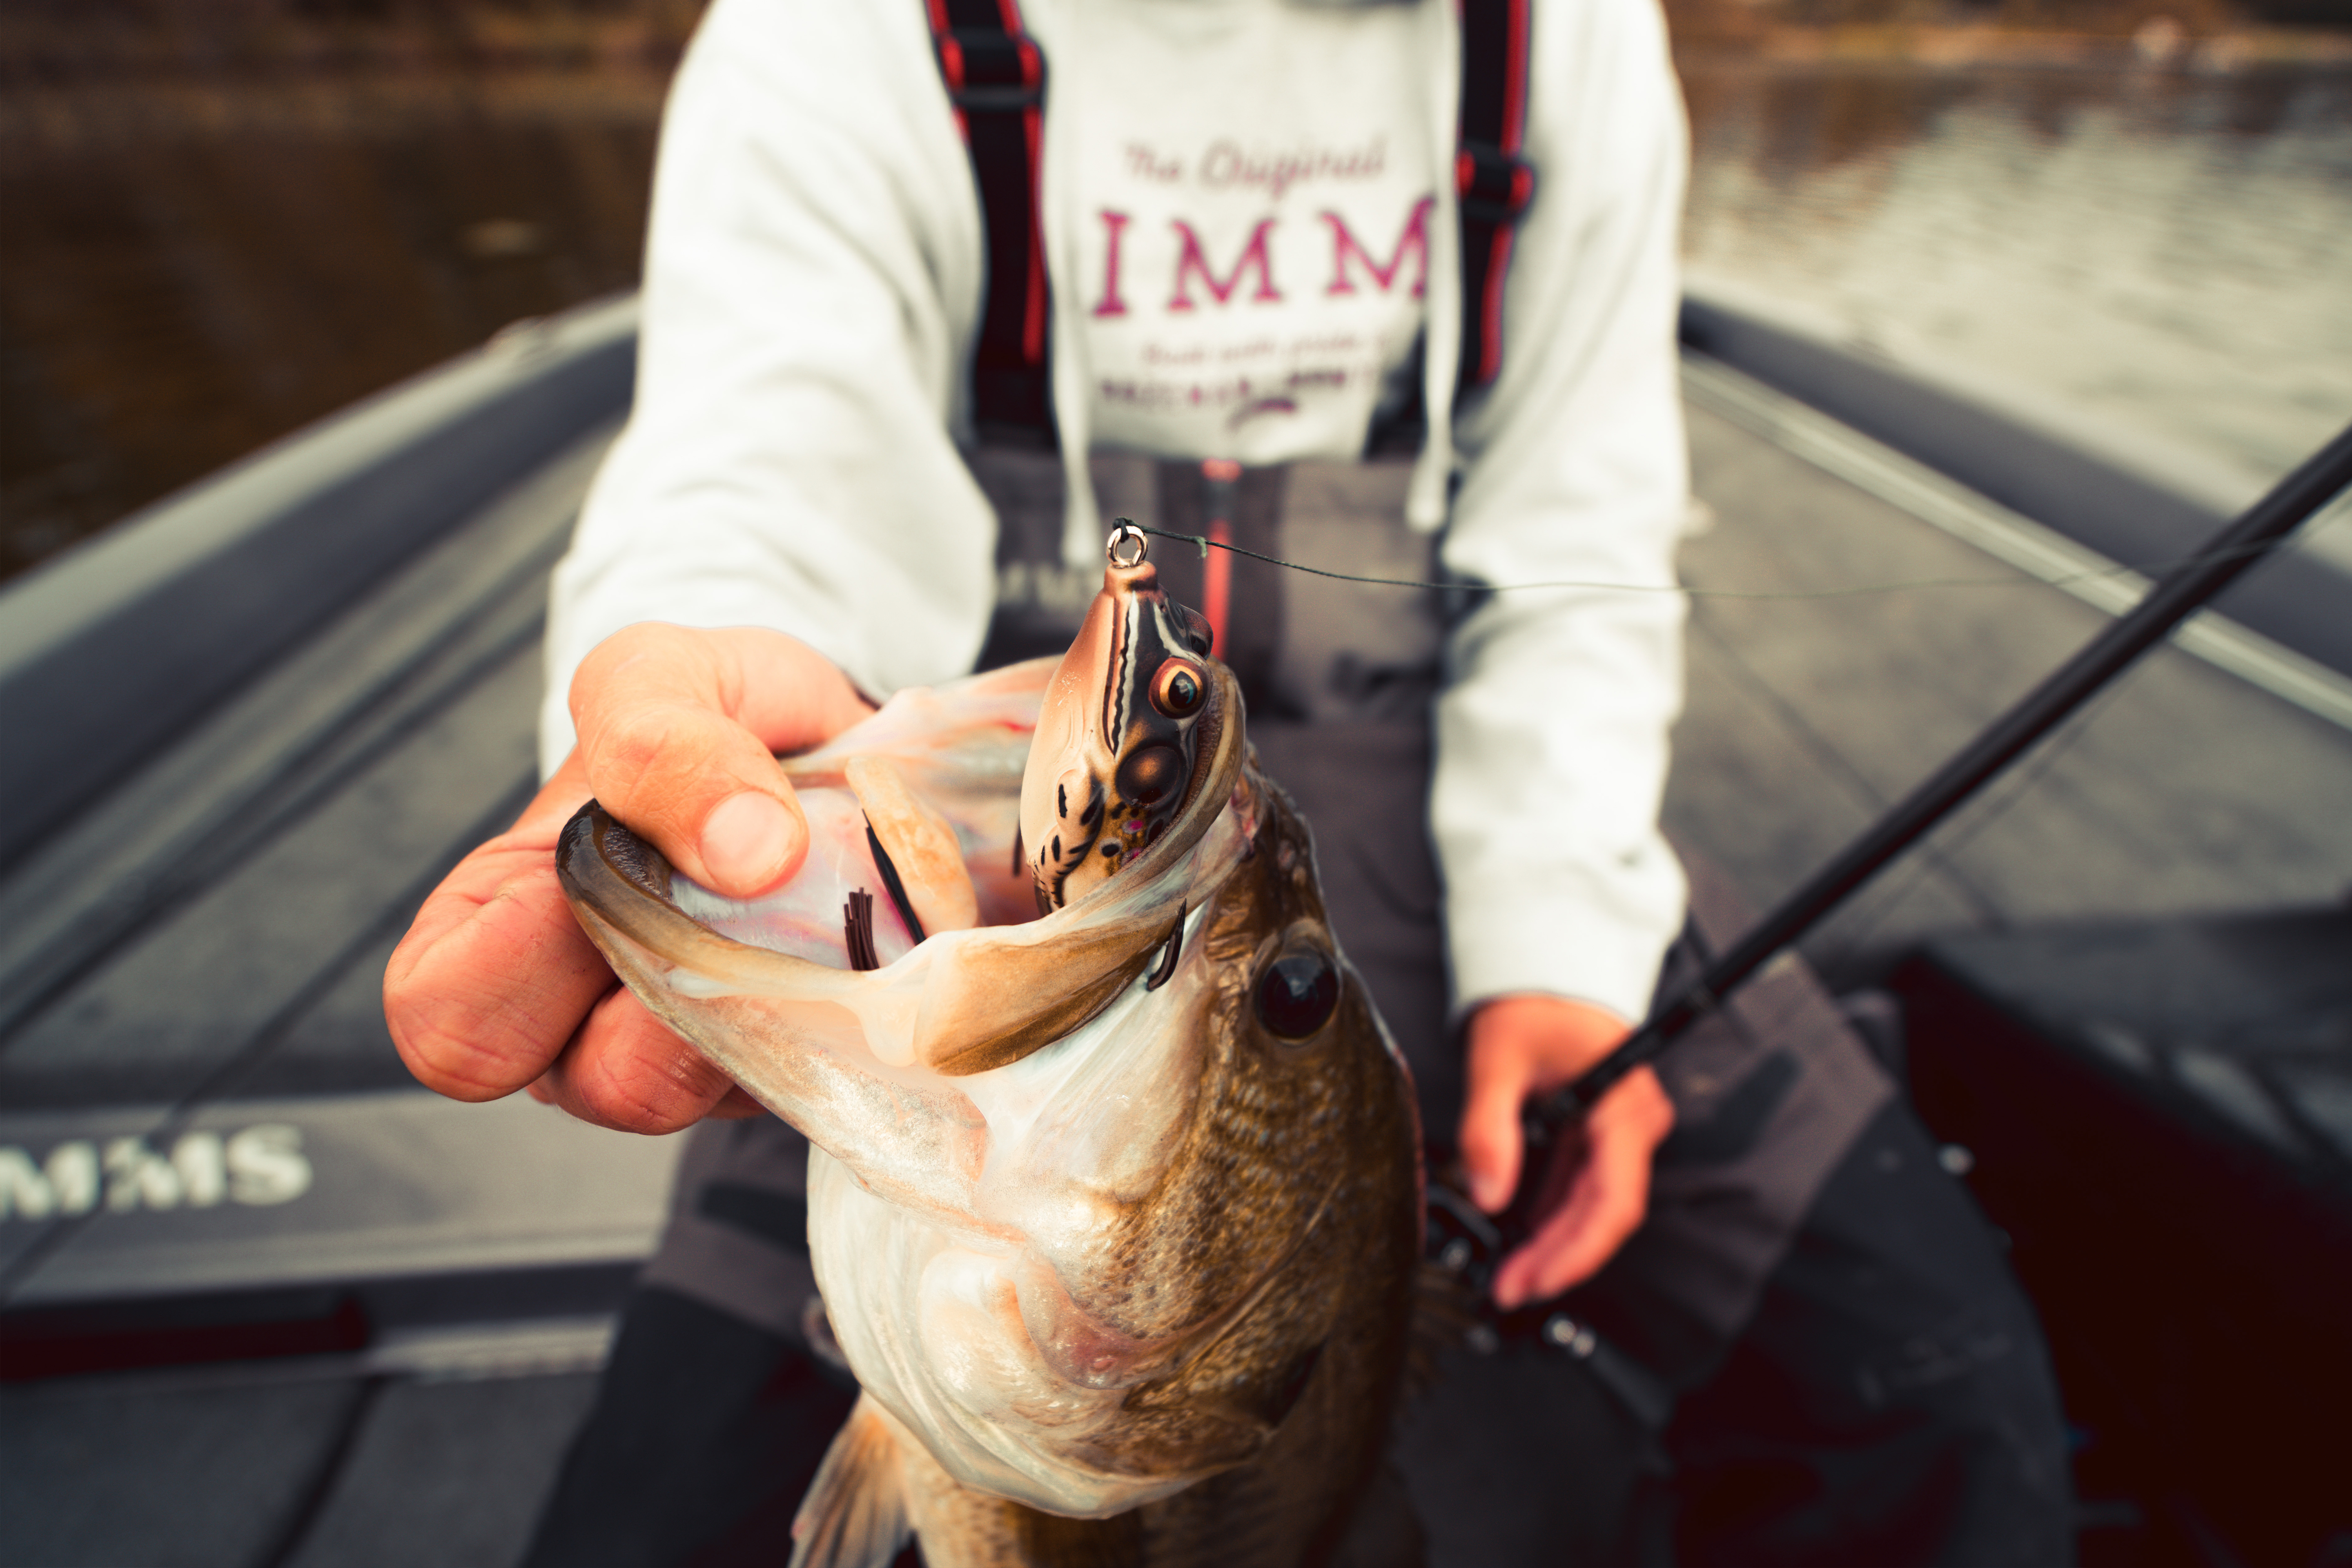 Immediate Release Becoming More Common In Fishing Tournaments - WPR